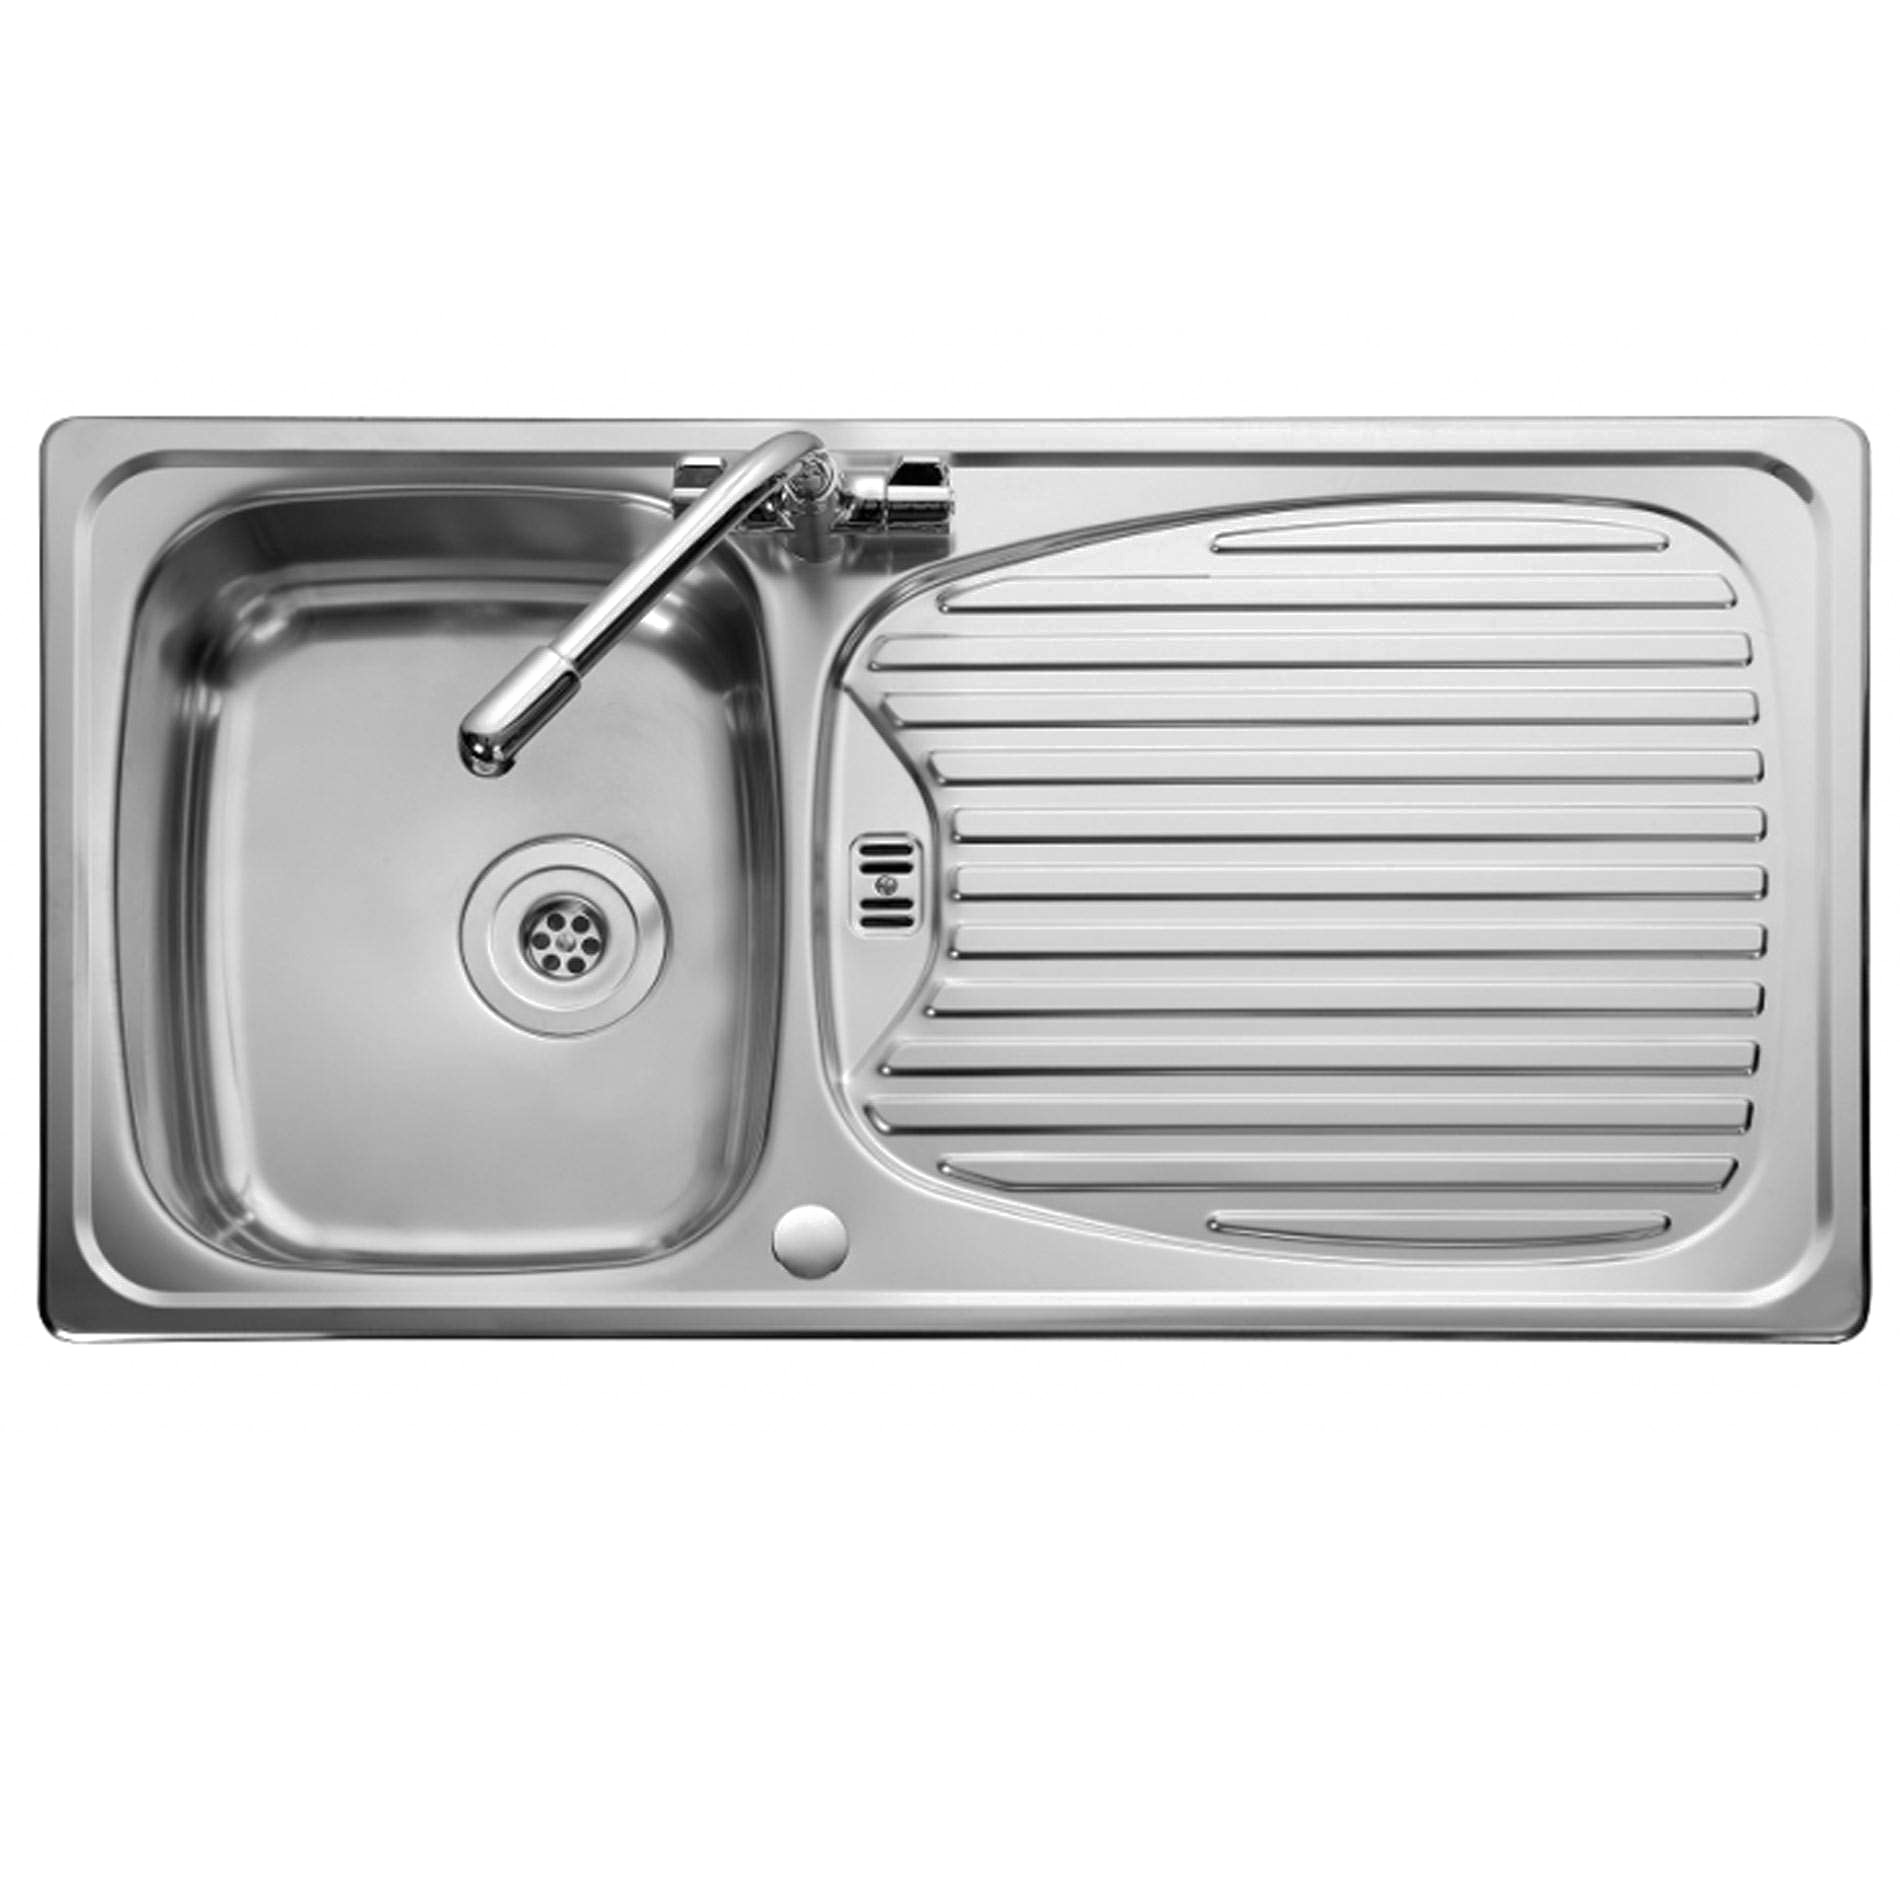 Stainless Steel Kitchen Sink PNG Transparent Image